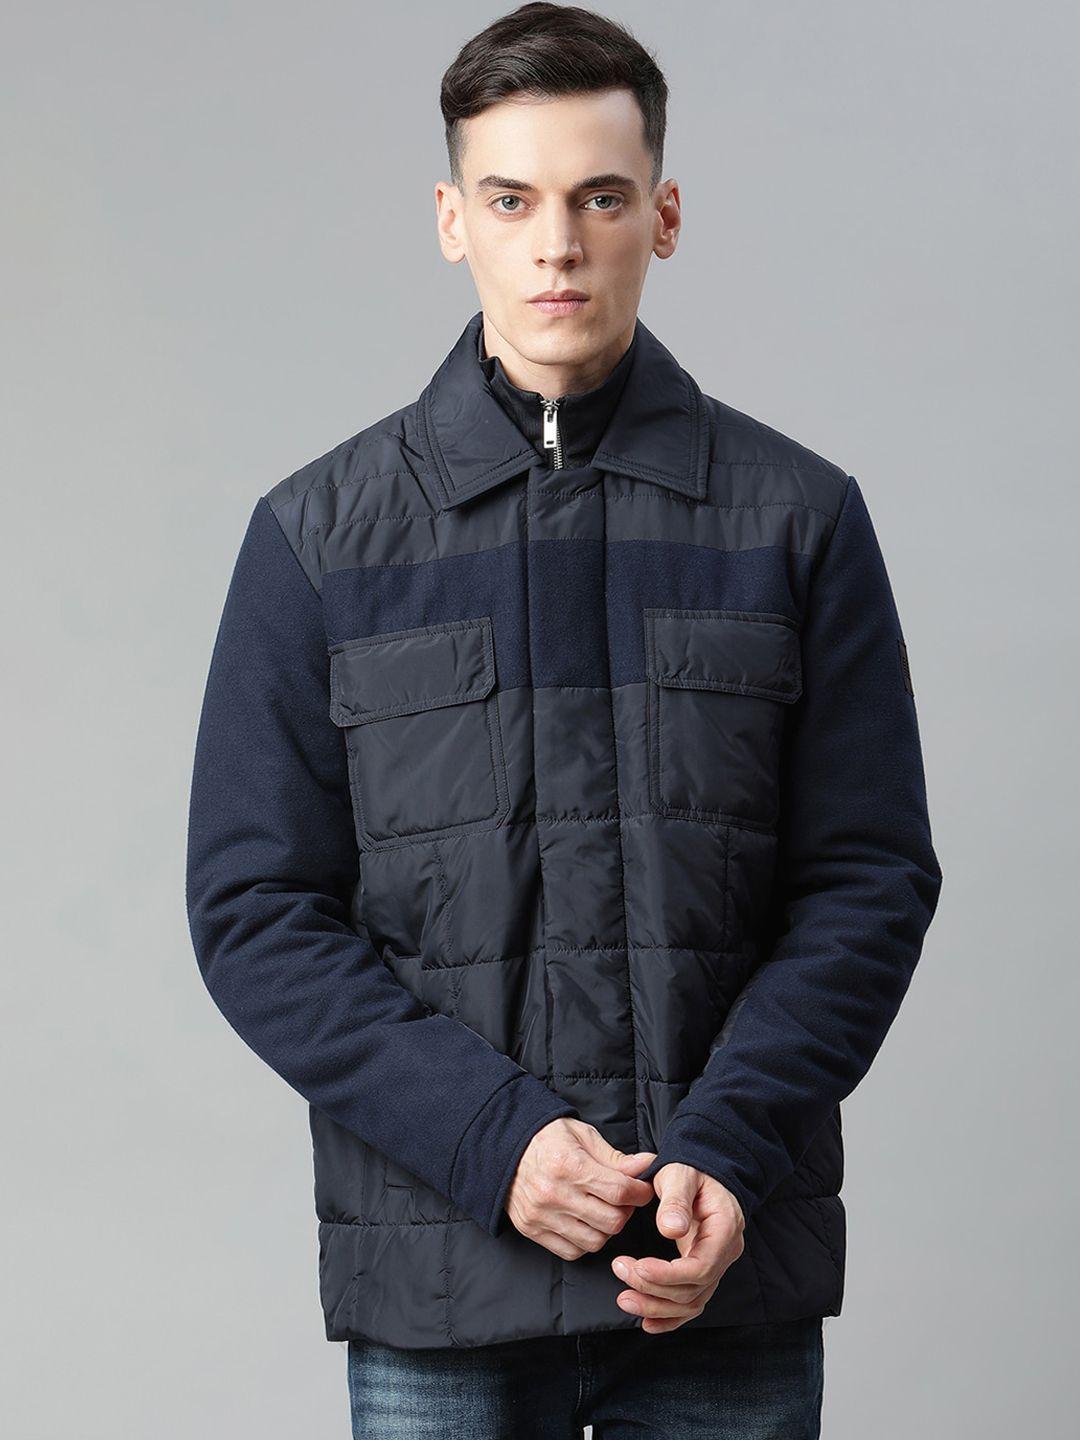 matinique-men-navy-blue-peacoat-checked-lightweight-longline-padded-jacket-with-patchwork